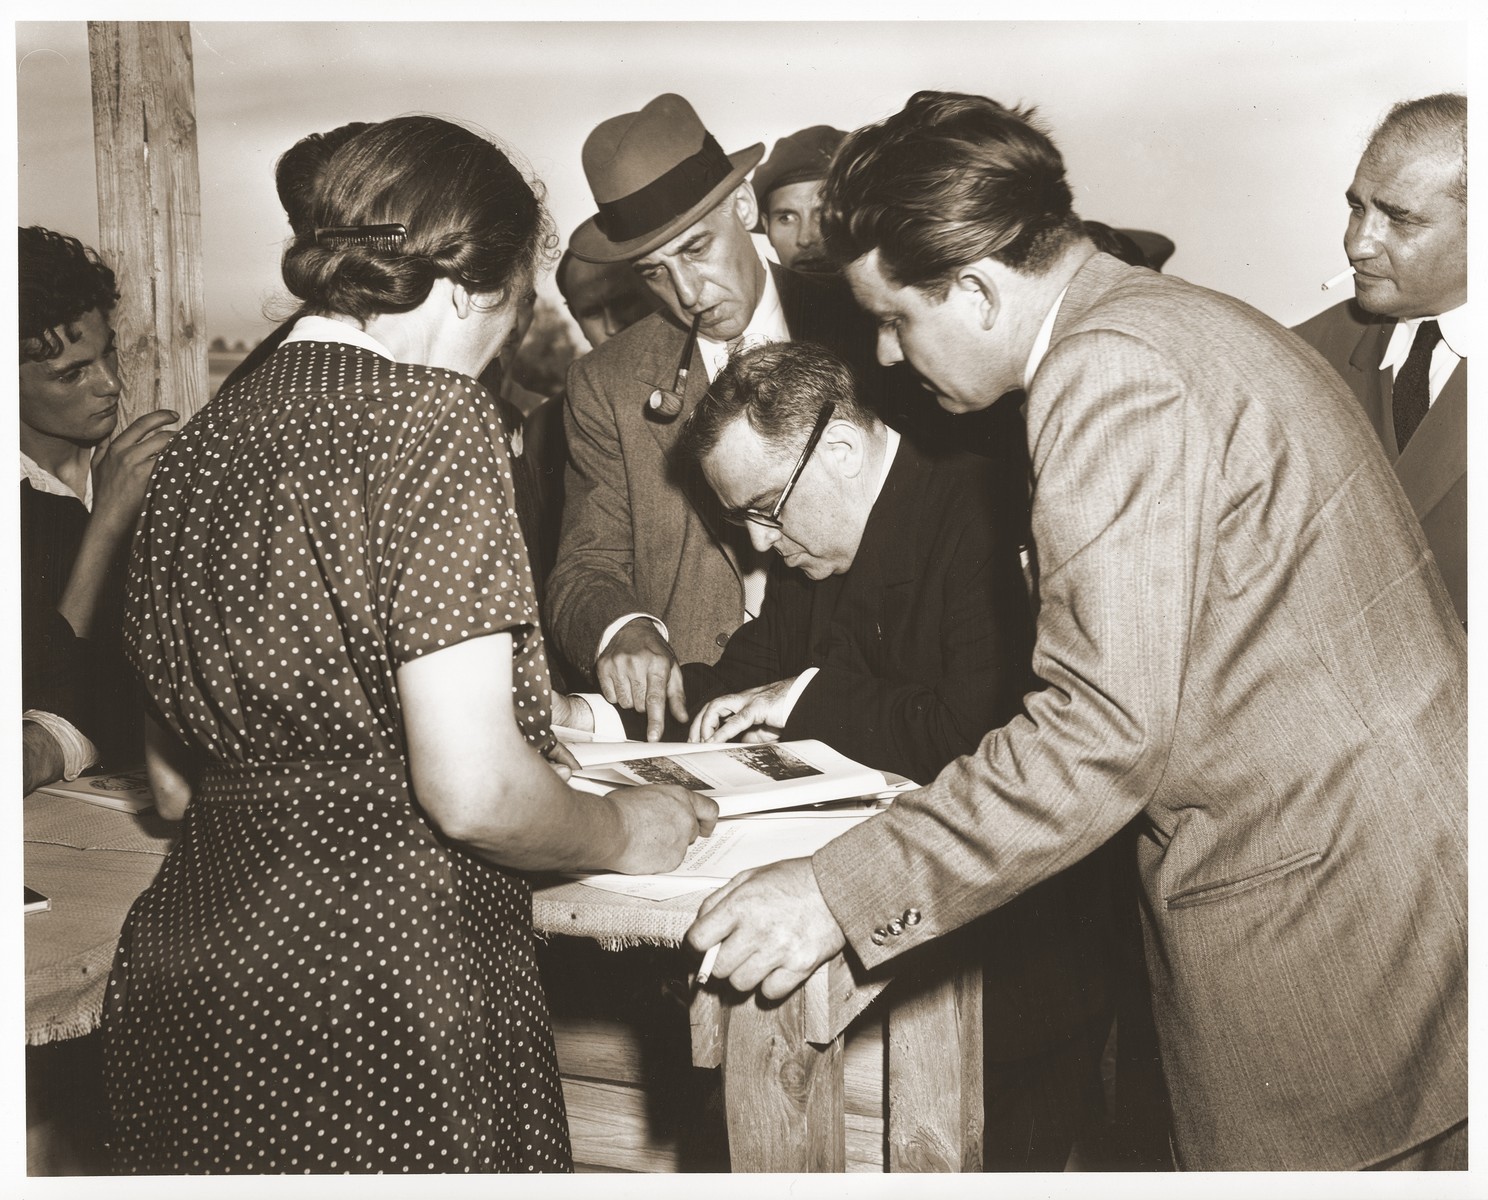 A survivor of the Lidice massacre shows Fiorello LaGuardia an album of photographs depicting the Nazi atrocity of June 1942, during an official visit by the UNRRA director to Lidice.

Also pictured is Laurence Steinhardt, U.S. Ambassador to Czechoslovakia (next to LaGuardia smoking a pipe), and Vaclav Majer, Czech minister of Food (to the right of LaGuardia).